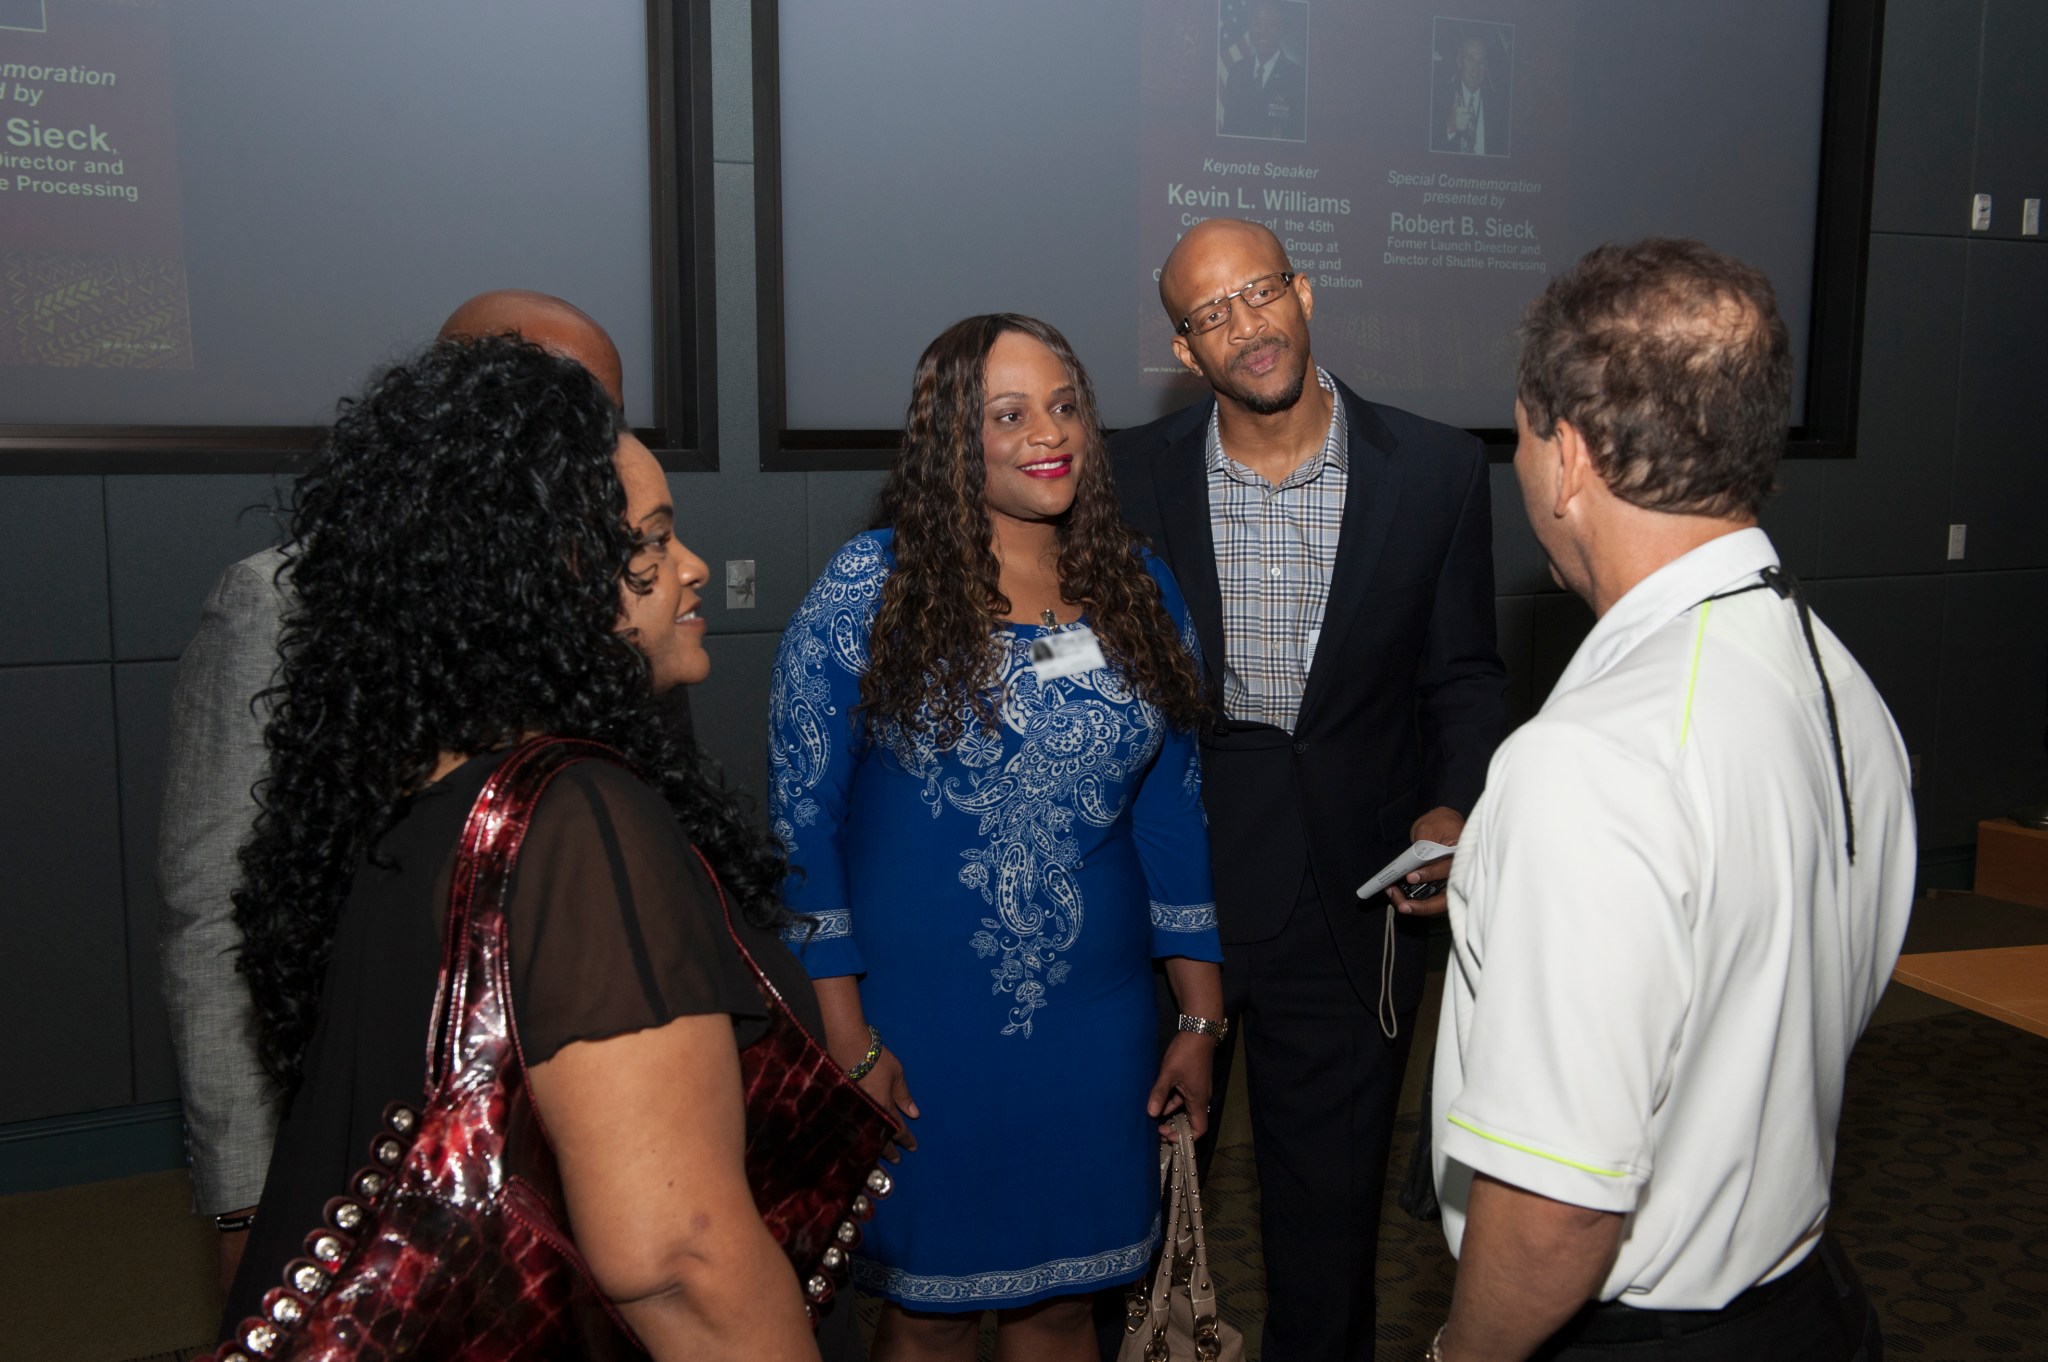 Kennedy Space Center workers and guests mingled during the center's Black History Month event Feb. 28, 2018.